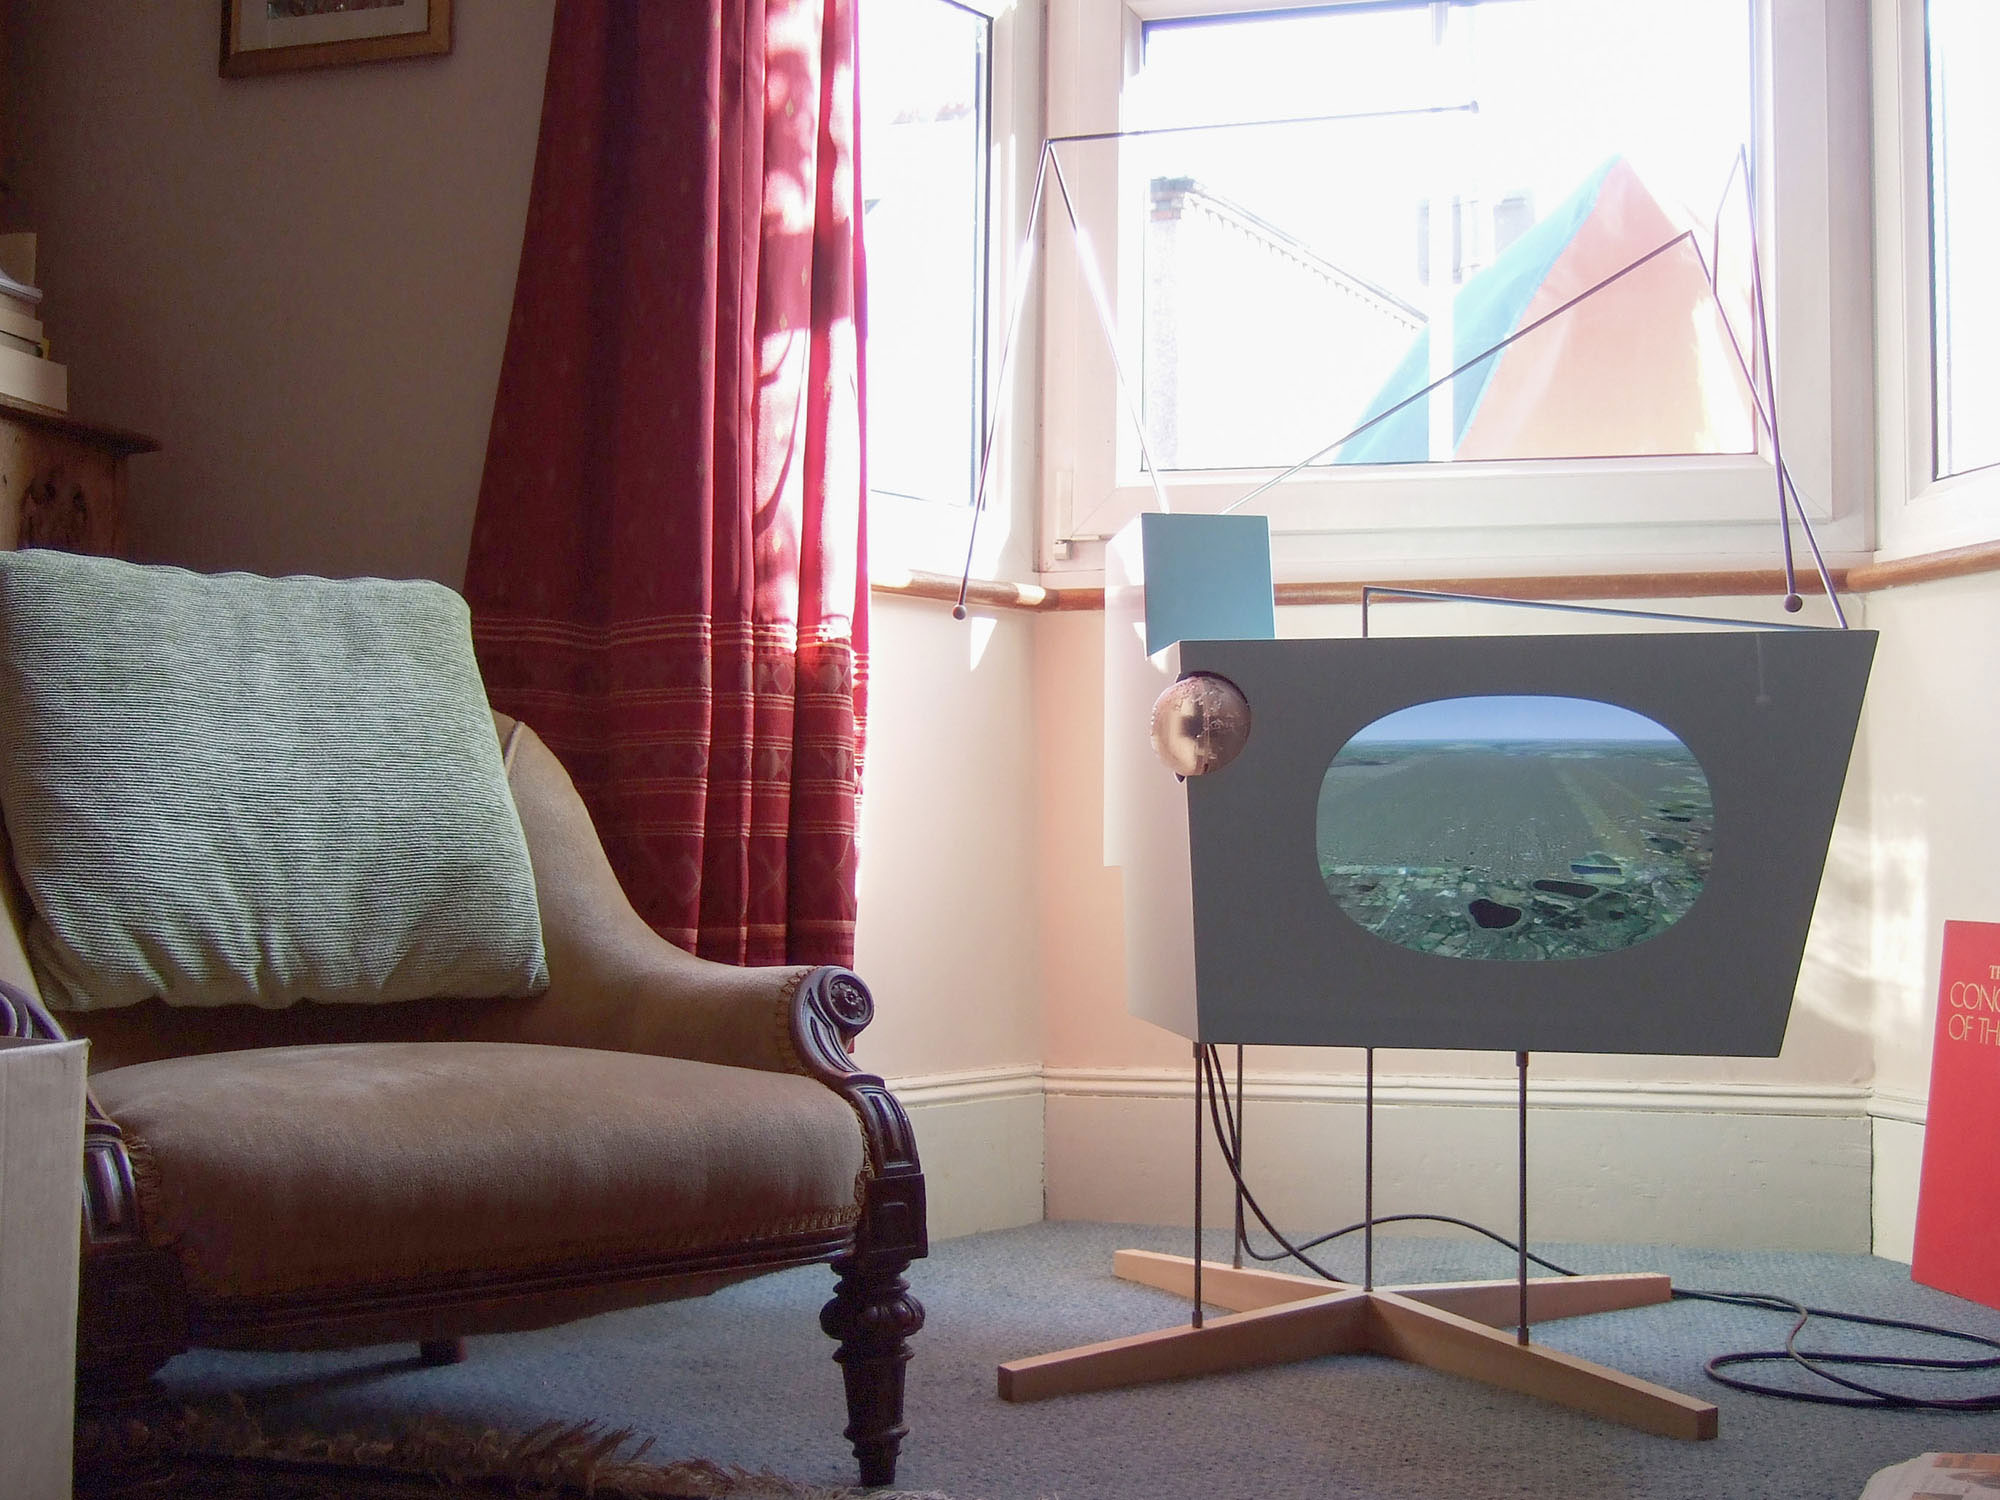 A photograph of the Plane Tracker in the living room of a participant